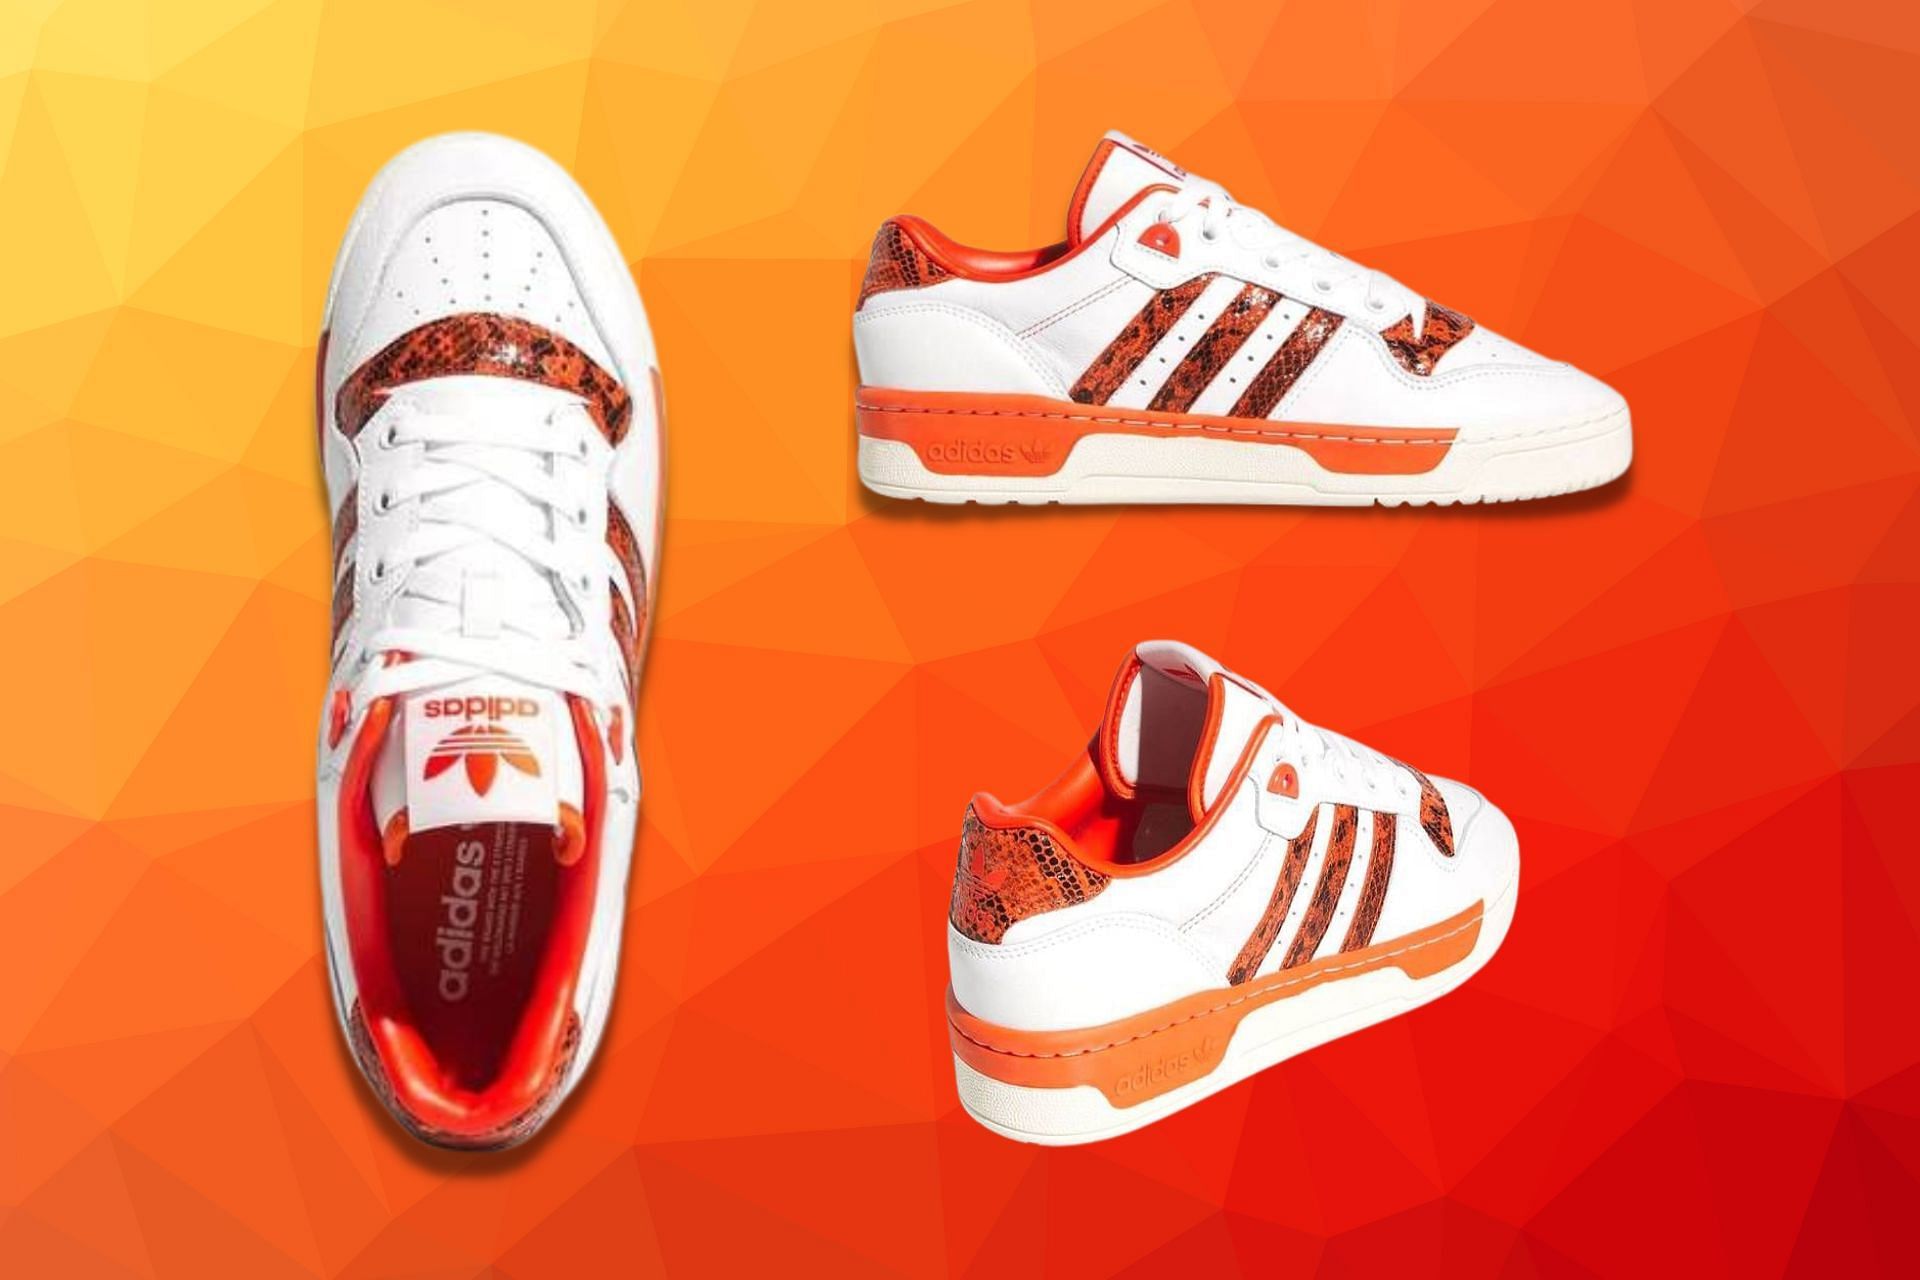 Where to buy Adidas Originals Rivalry Low “Orange Snakeskin” shoes ...